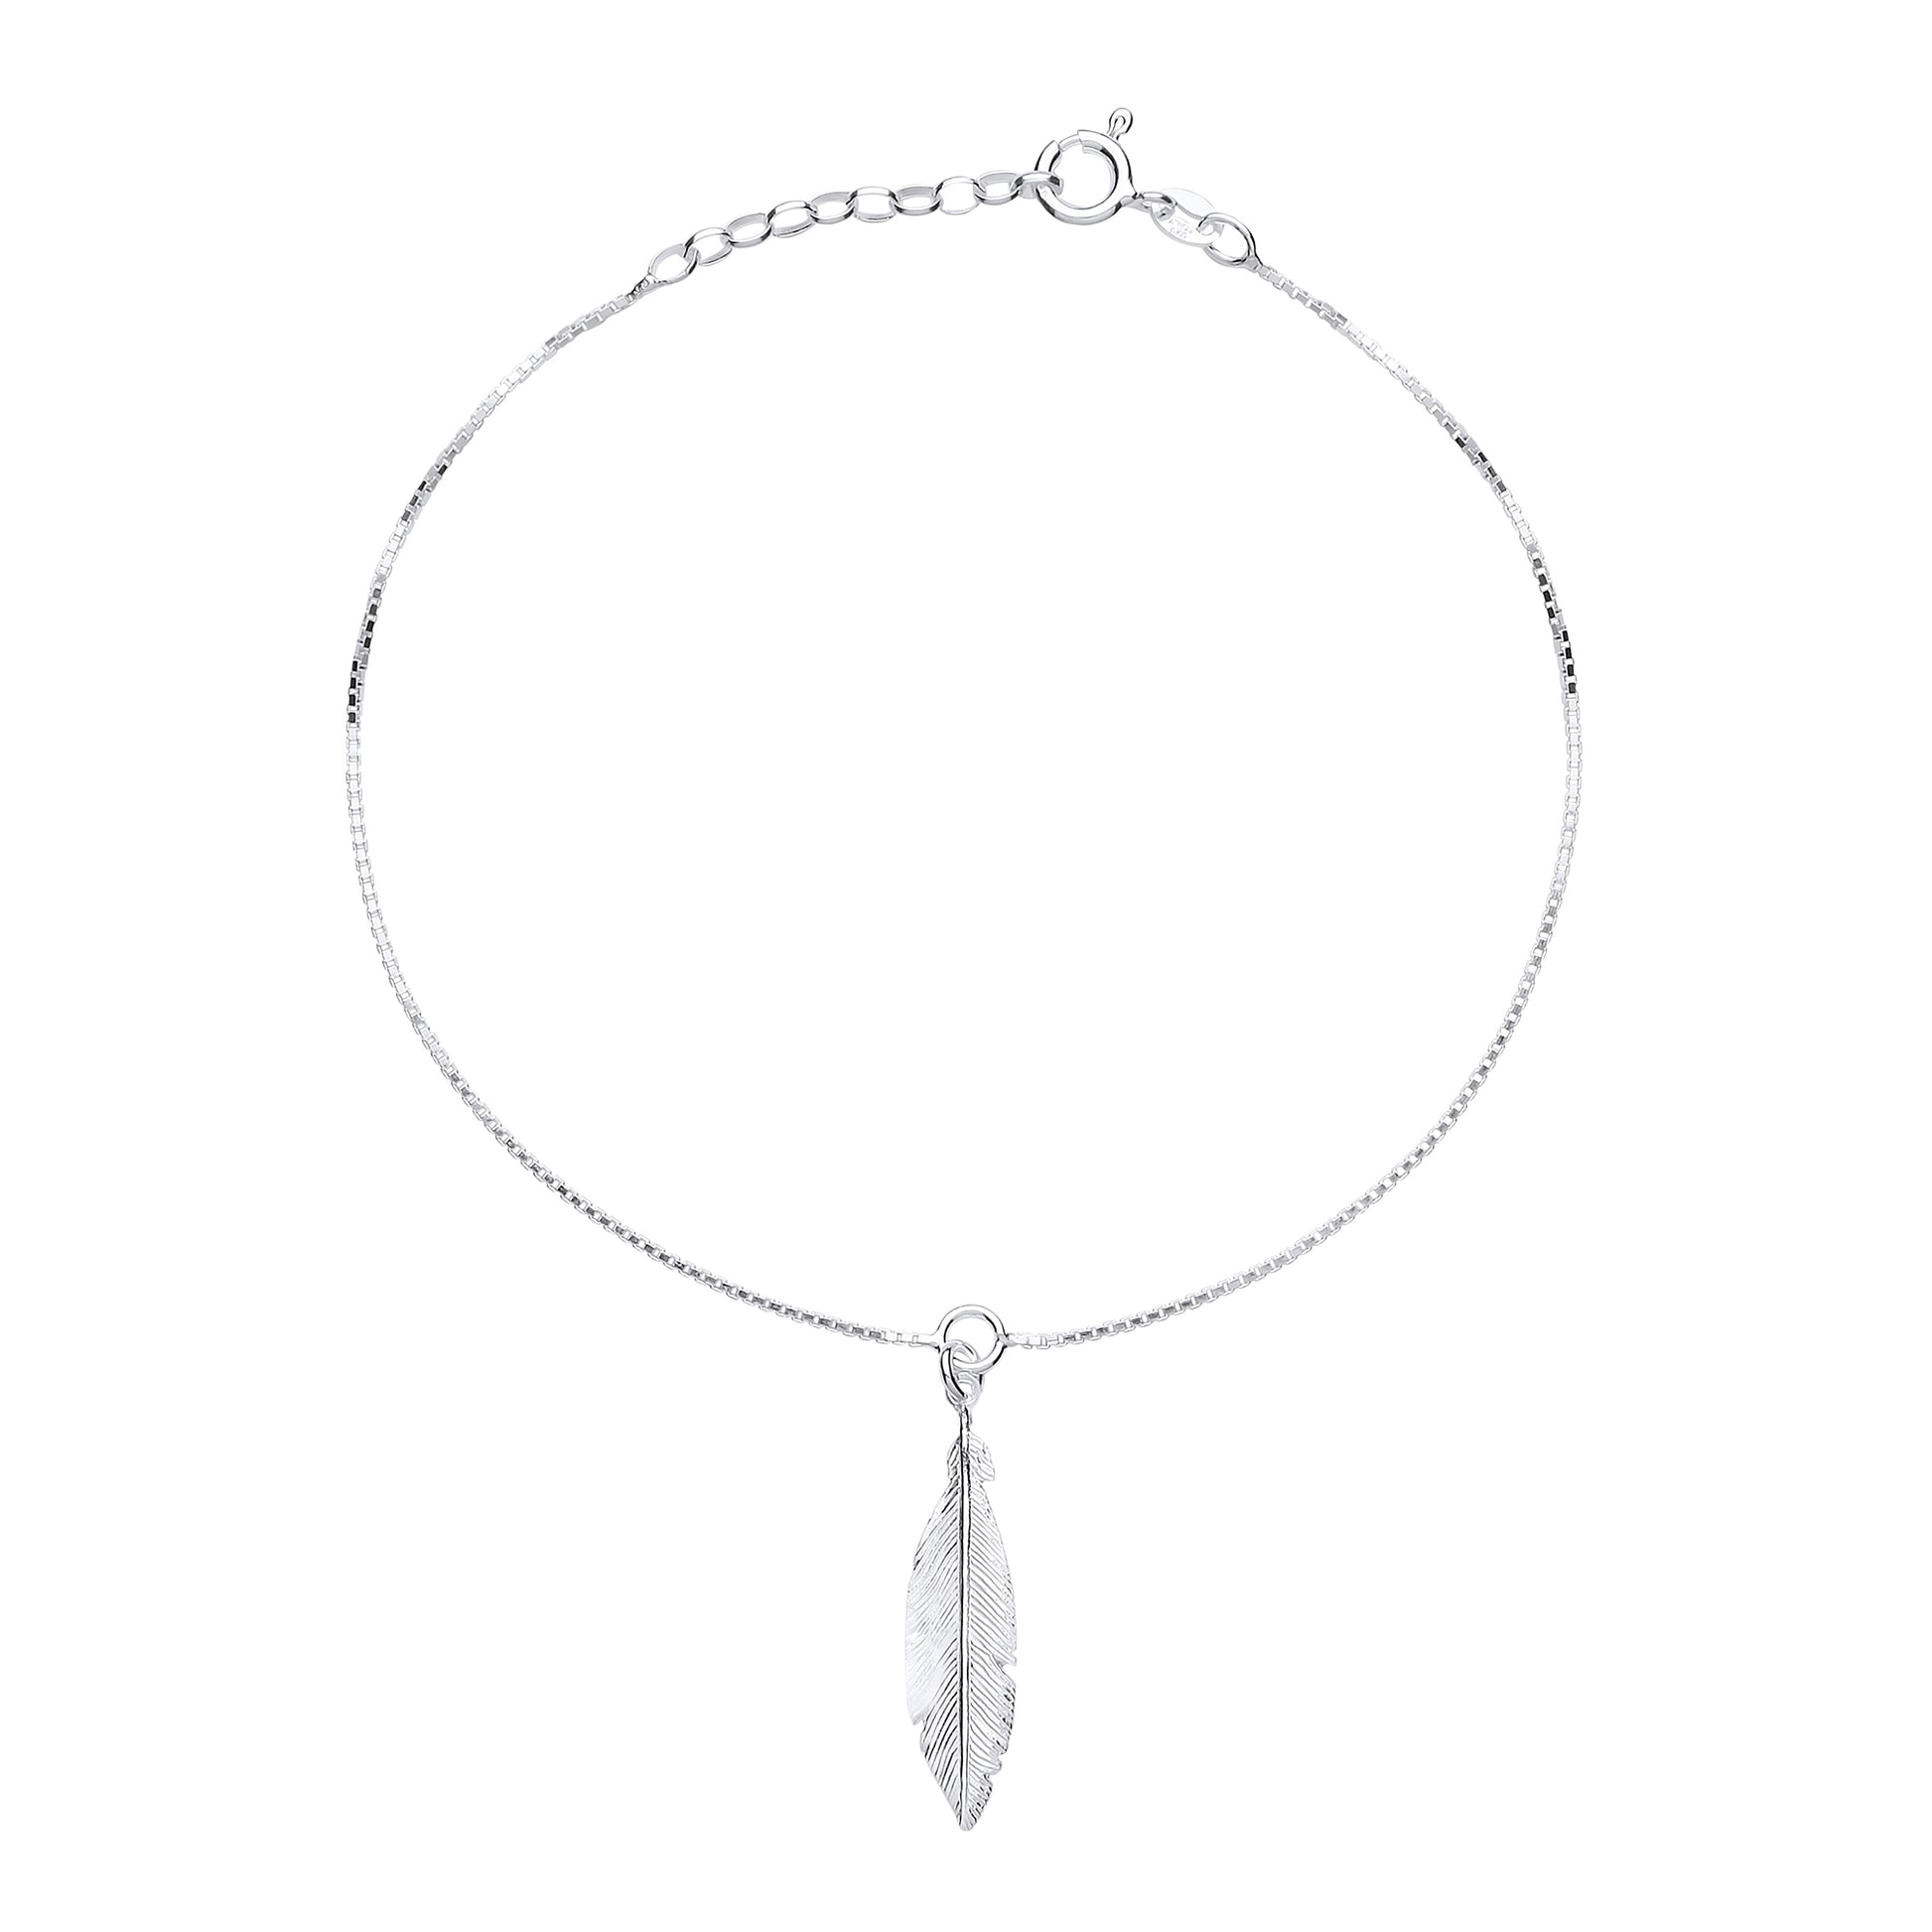 Silver  Angel Wing Feather Charm Anklet 30mm 9 + 1 inch - ANK002